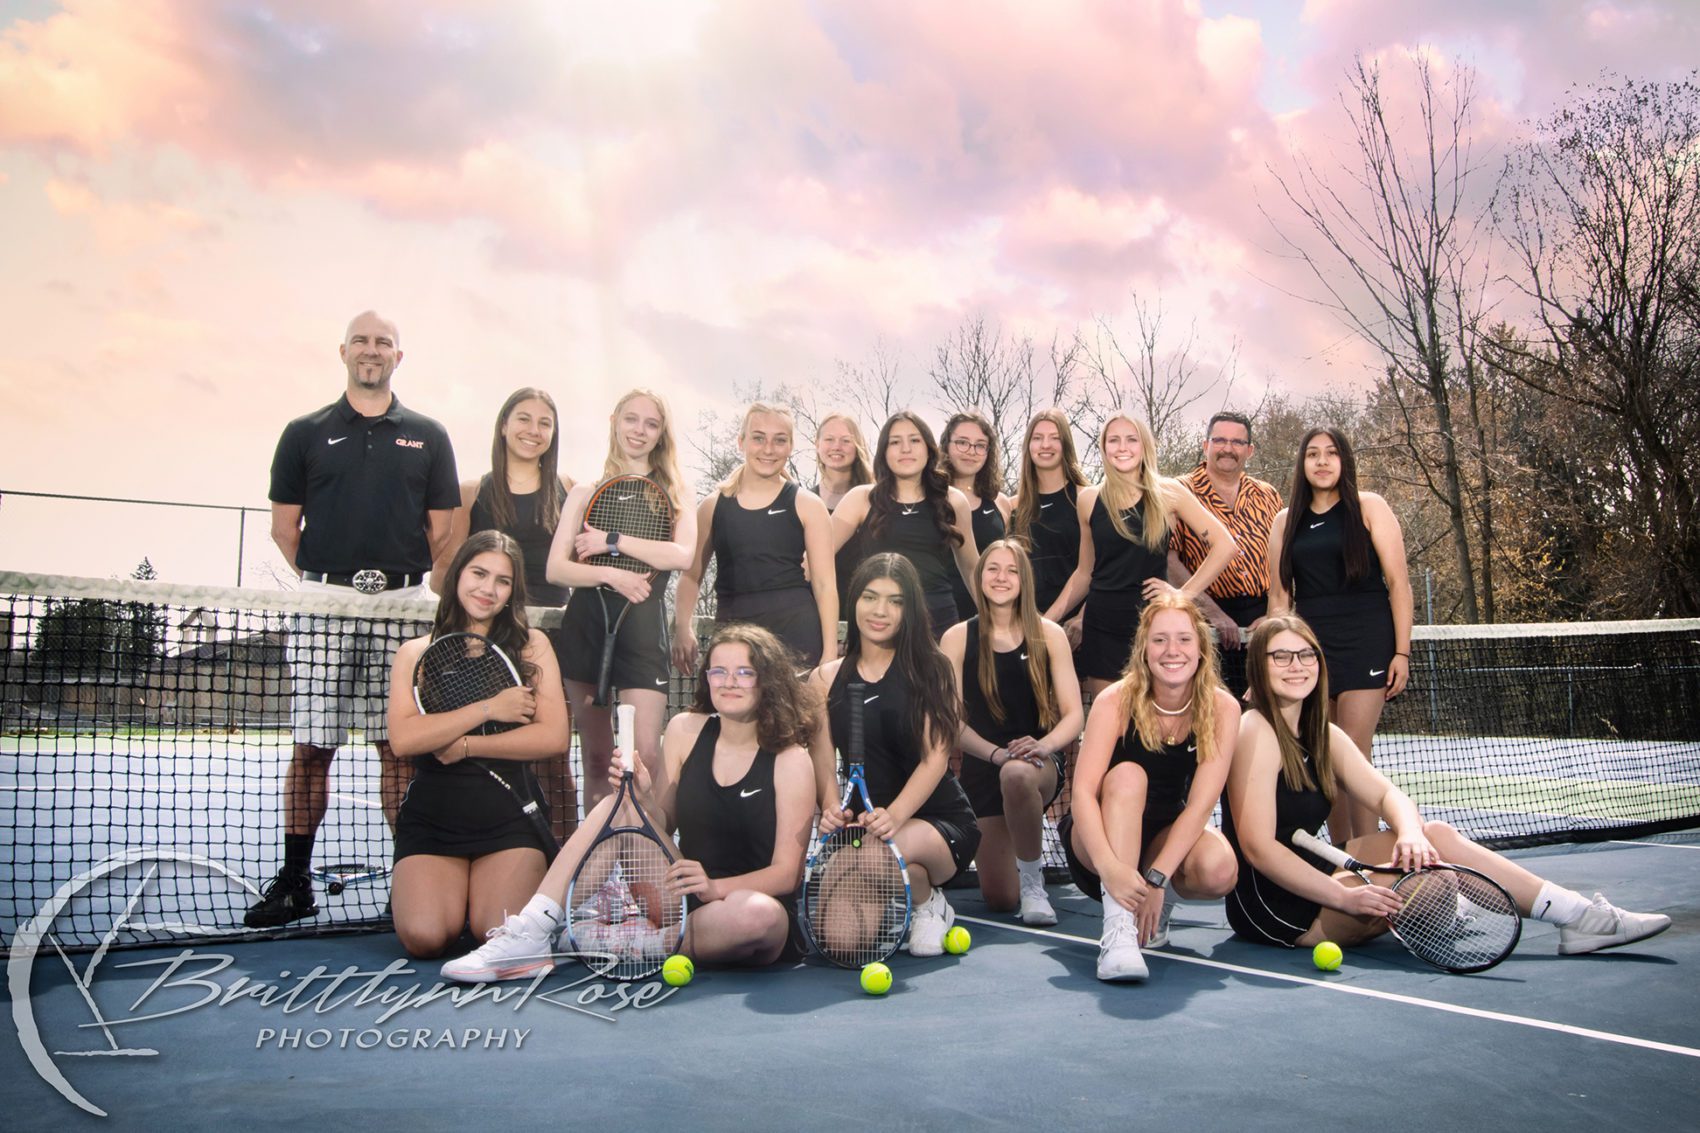 Fremont falls to Grant in Thursday afternoon tennis match